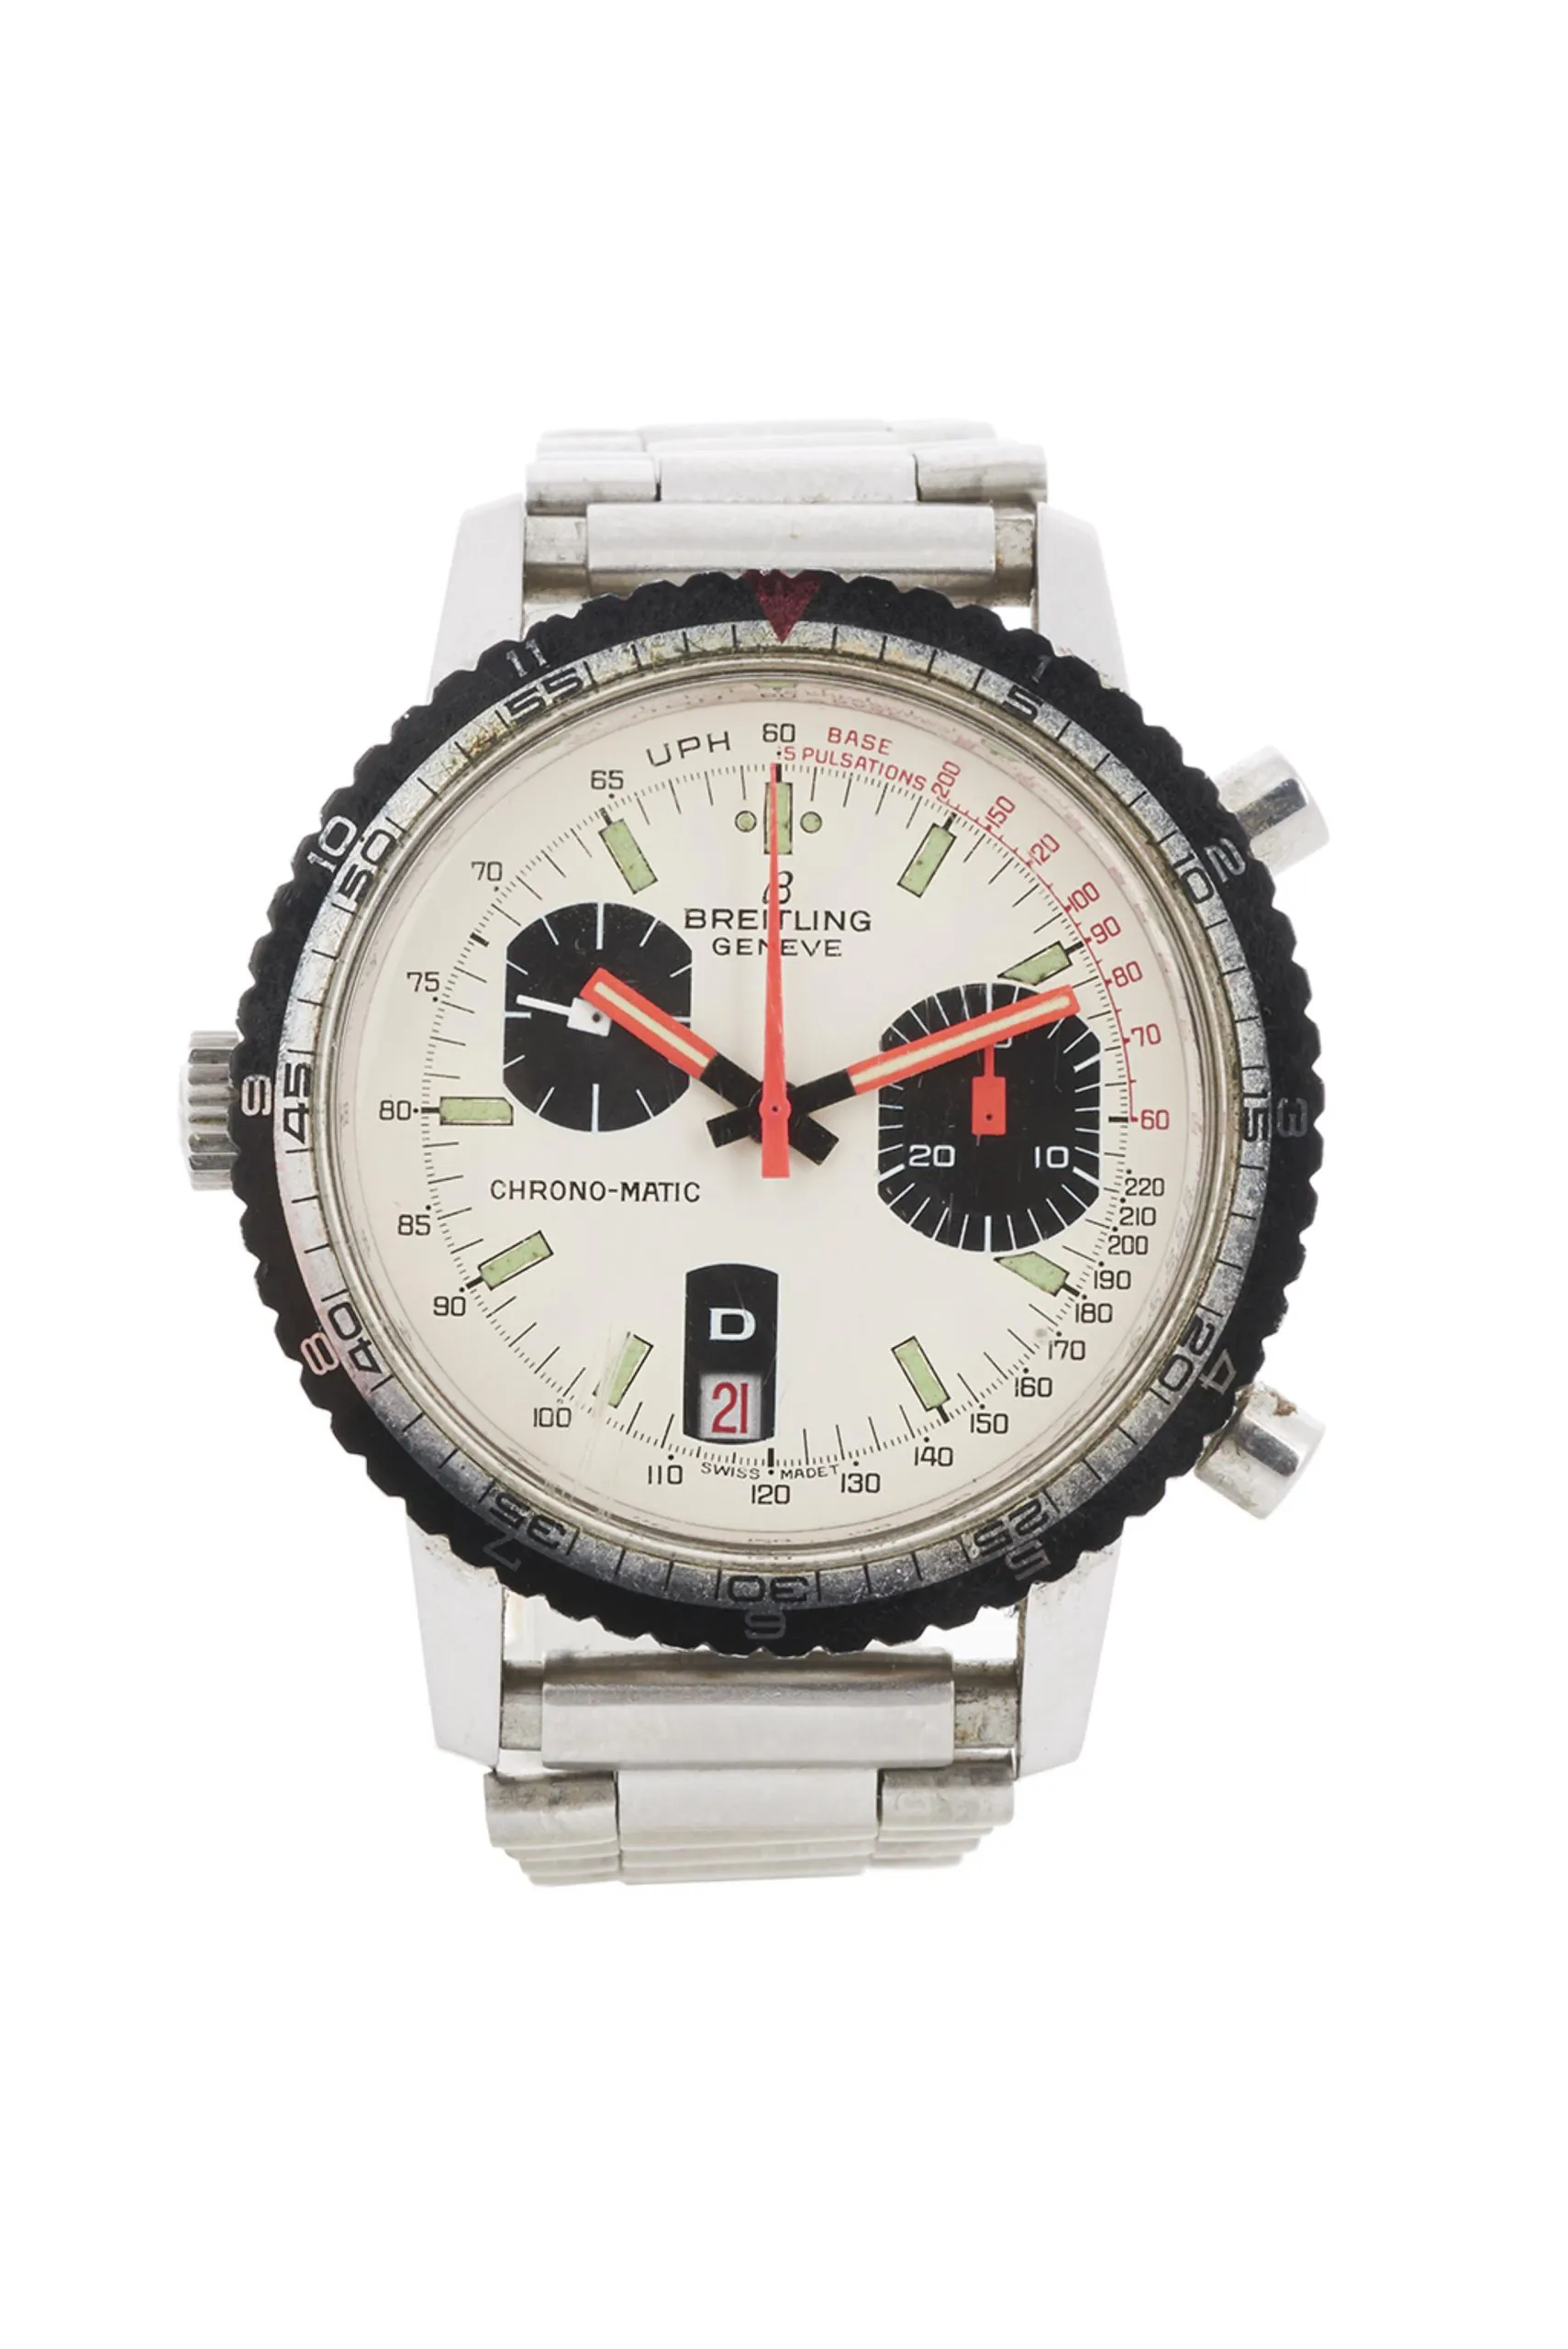 Breitling Chrono-Matic 2110-15 39mm Stainless steel Ivory